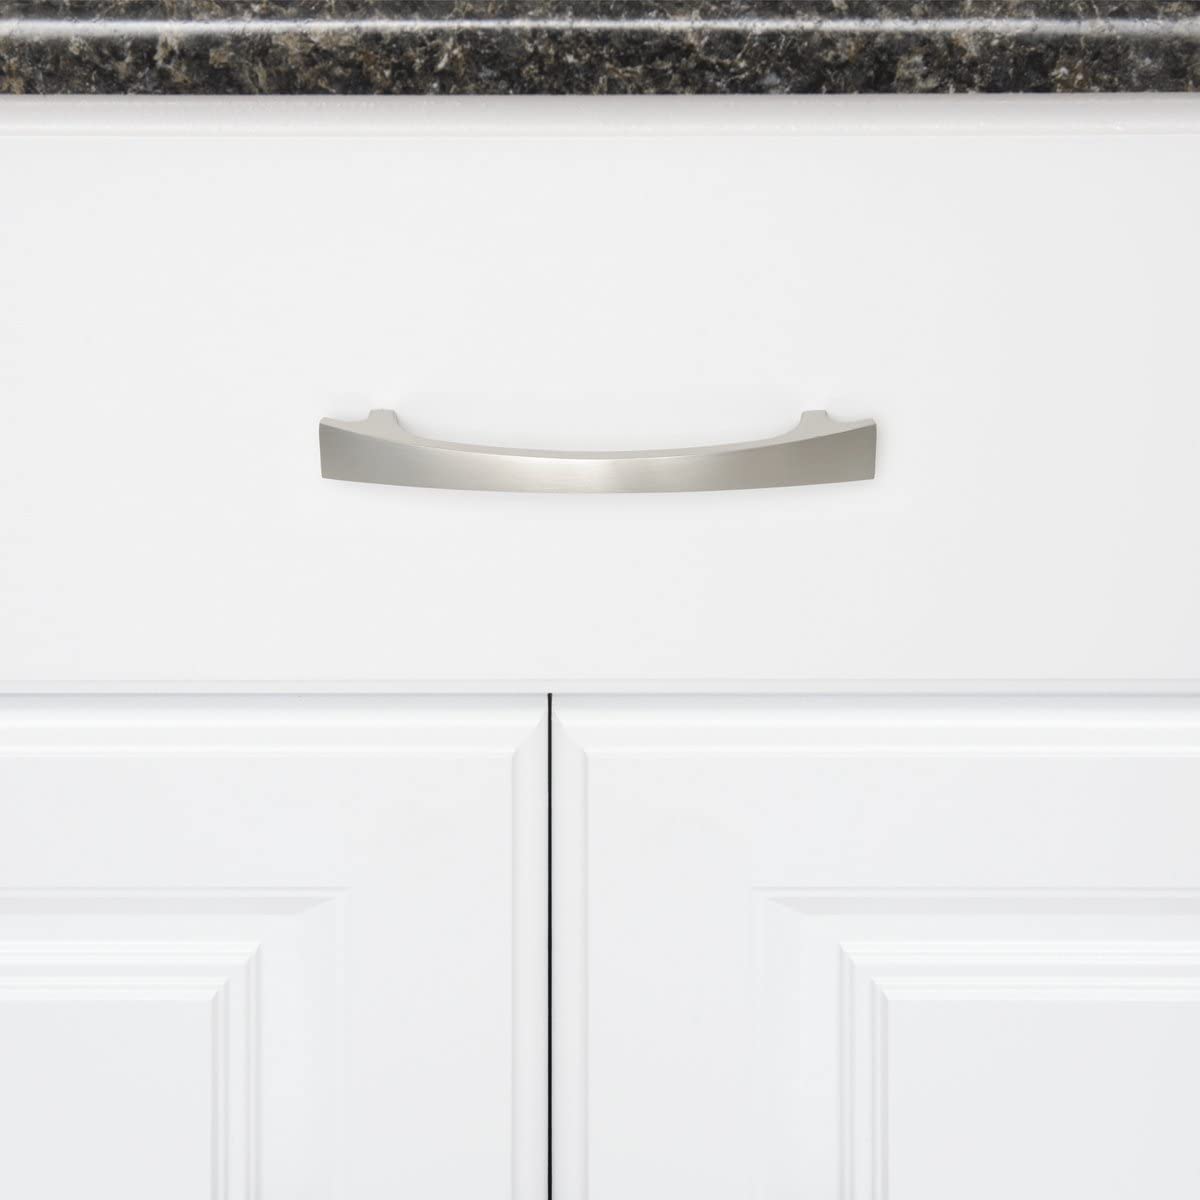 Amazon Basics Thick Modern Curved Cabinet Handle  6.5-inch Length Satin Nickel 10-Pack